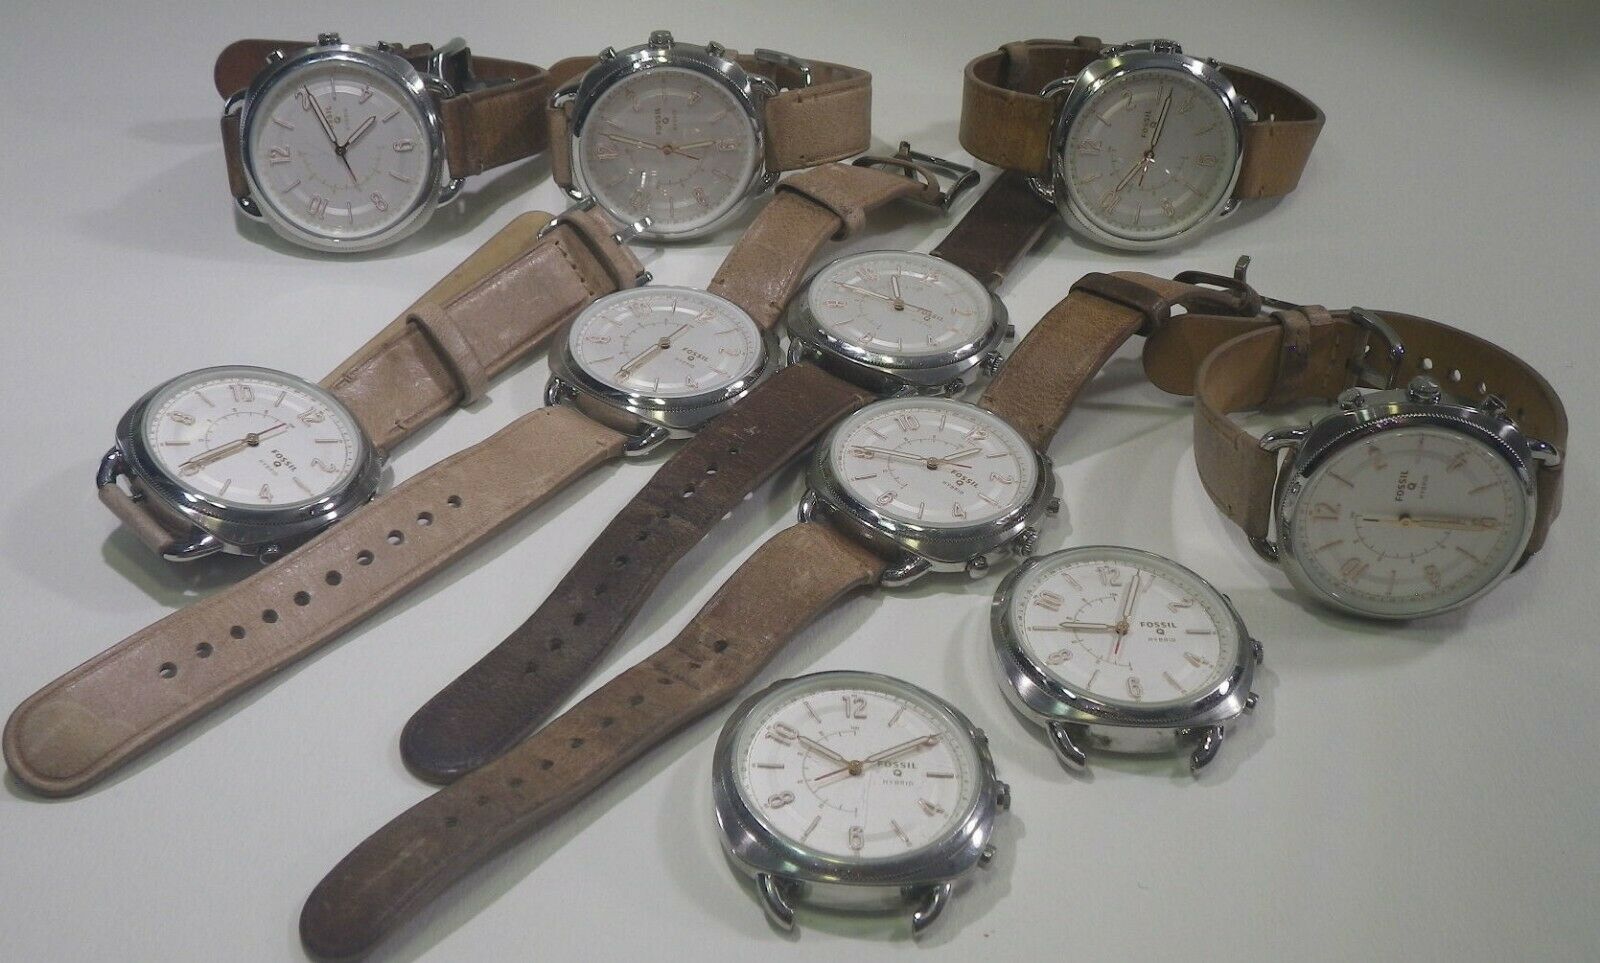 Lot of 10 FOSSIL Hybrid Q Watches FTW-1200 - pre-owned AS-IS